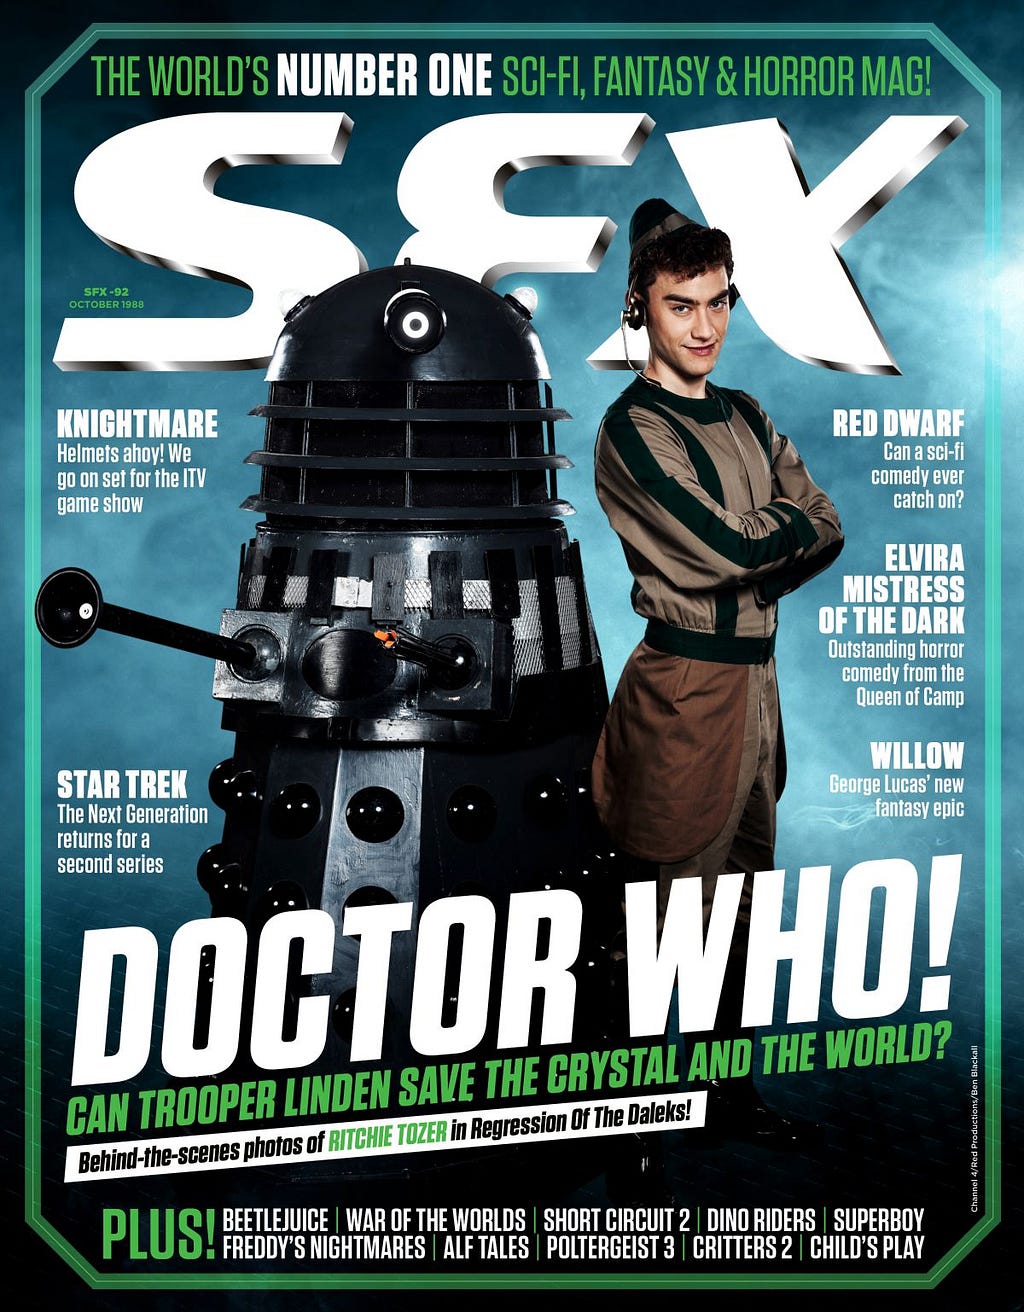 Olly Alexander as Ritchie alongside a Dalek on the cover of SFX